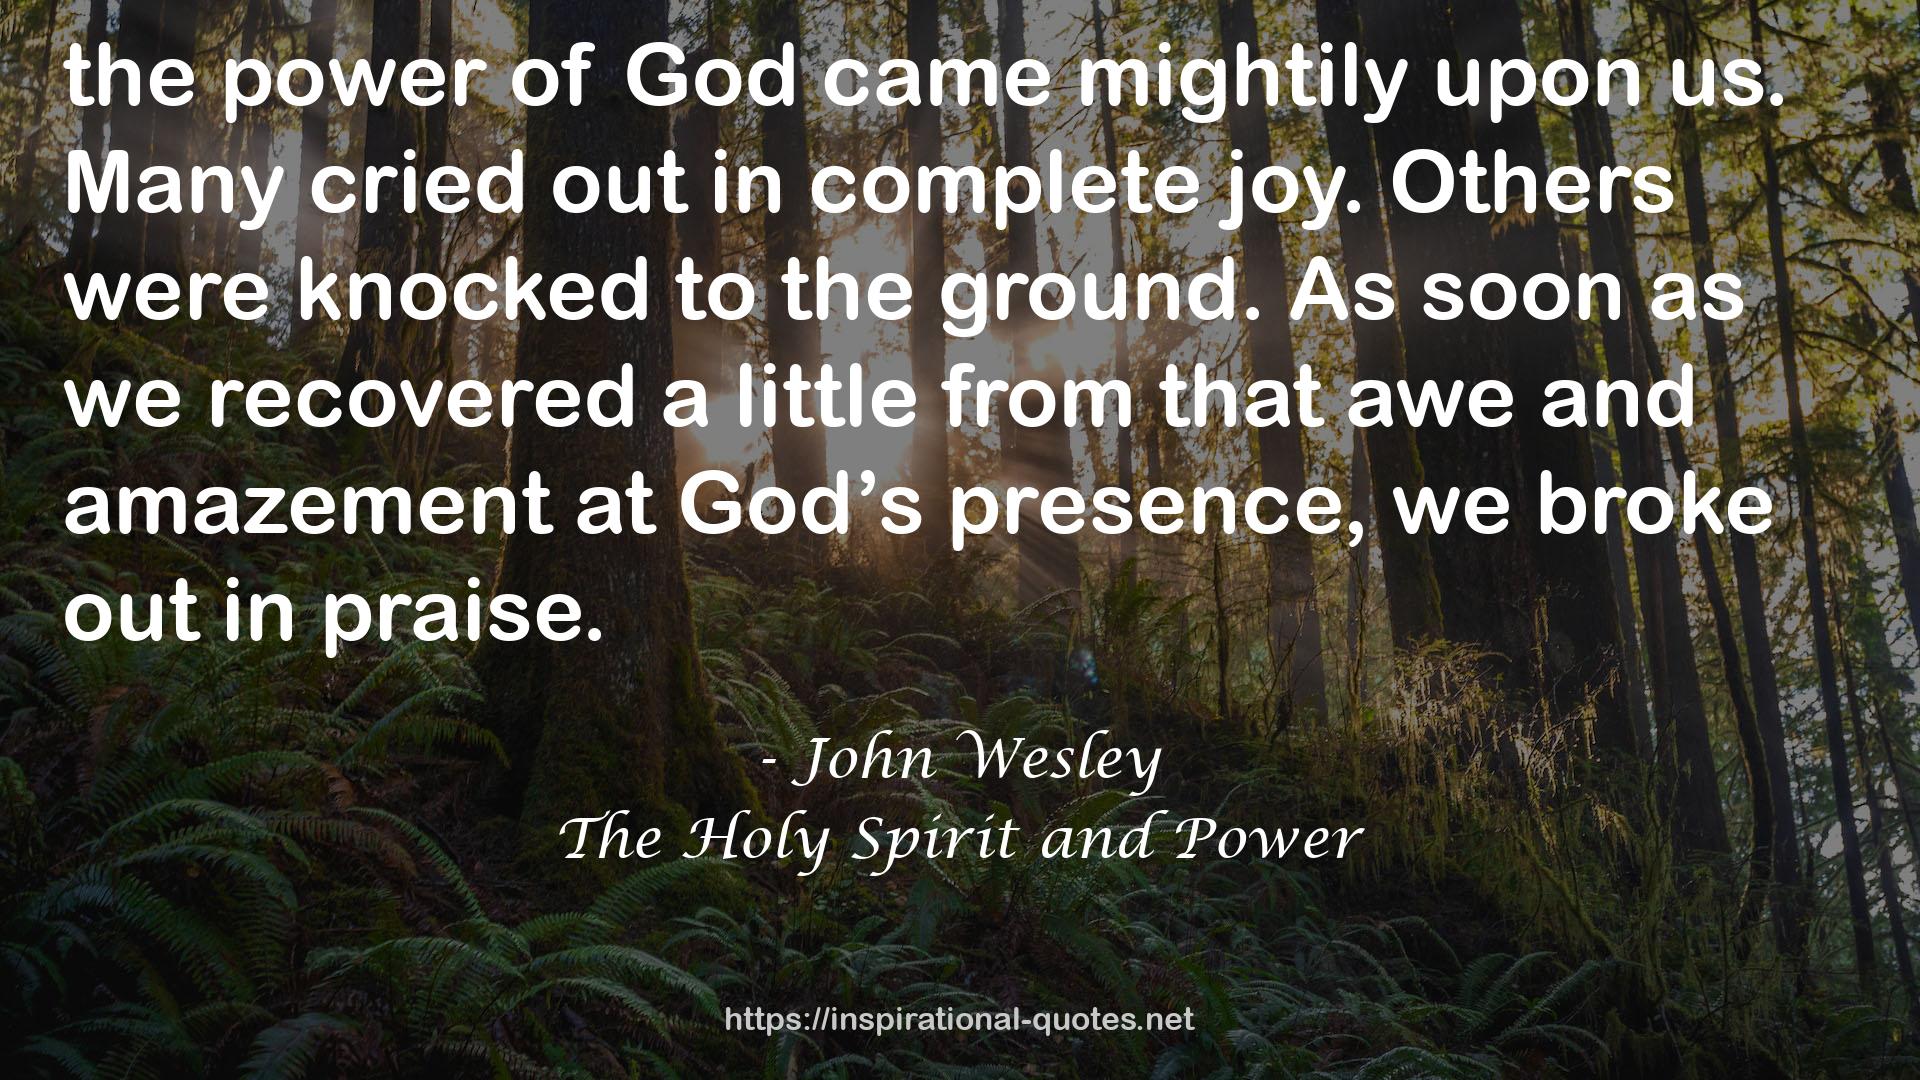 John Wesley QUOTES